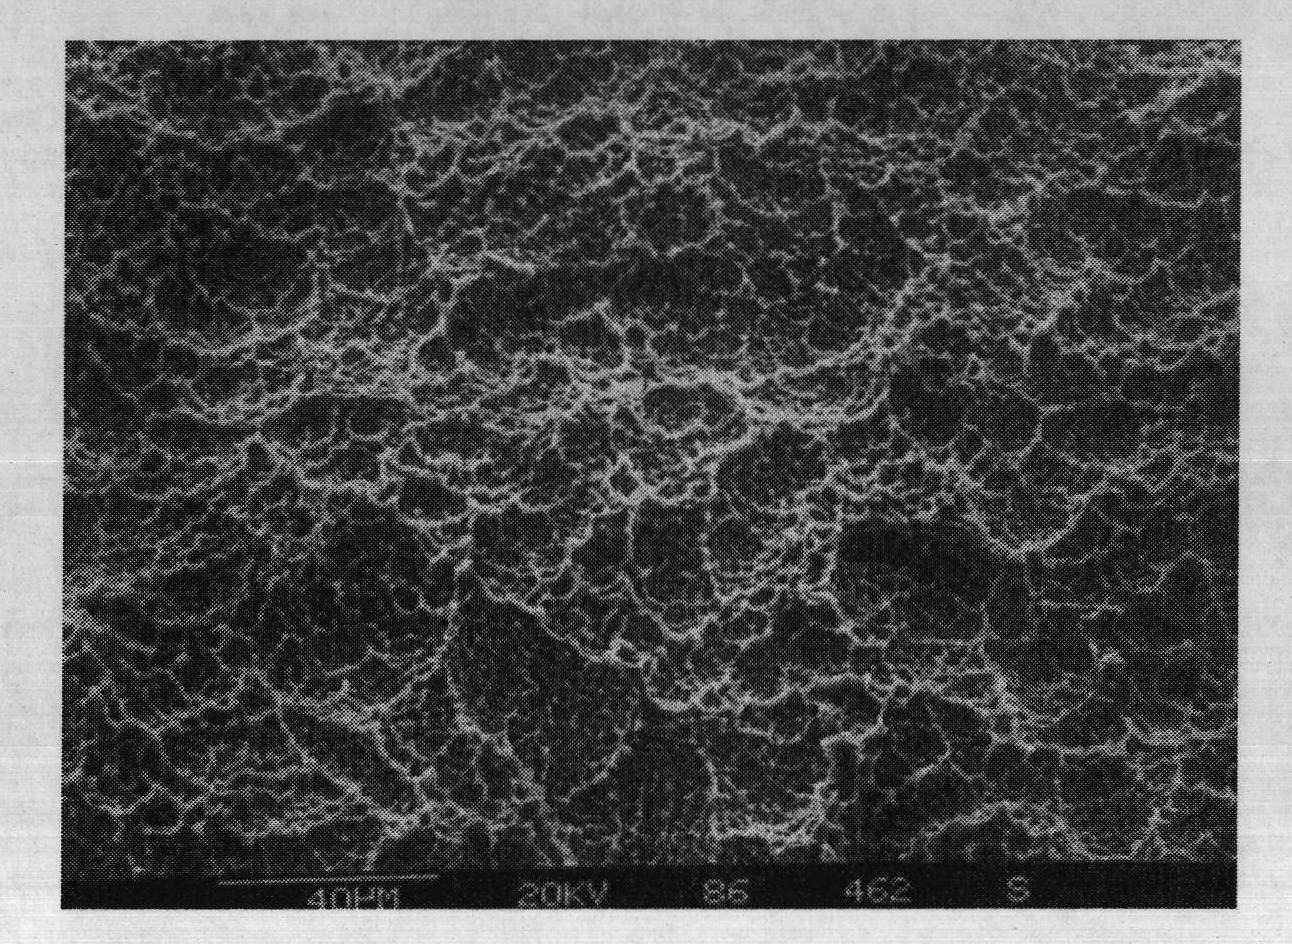 Preparation of nano-coating micropore surface implant having regeneration activity and antibacterial property